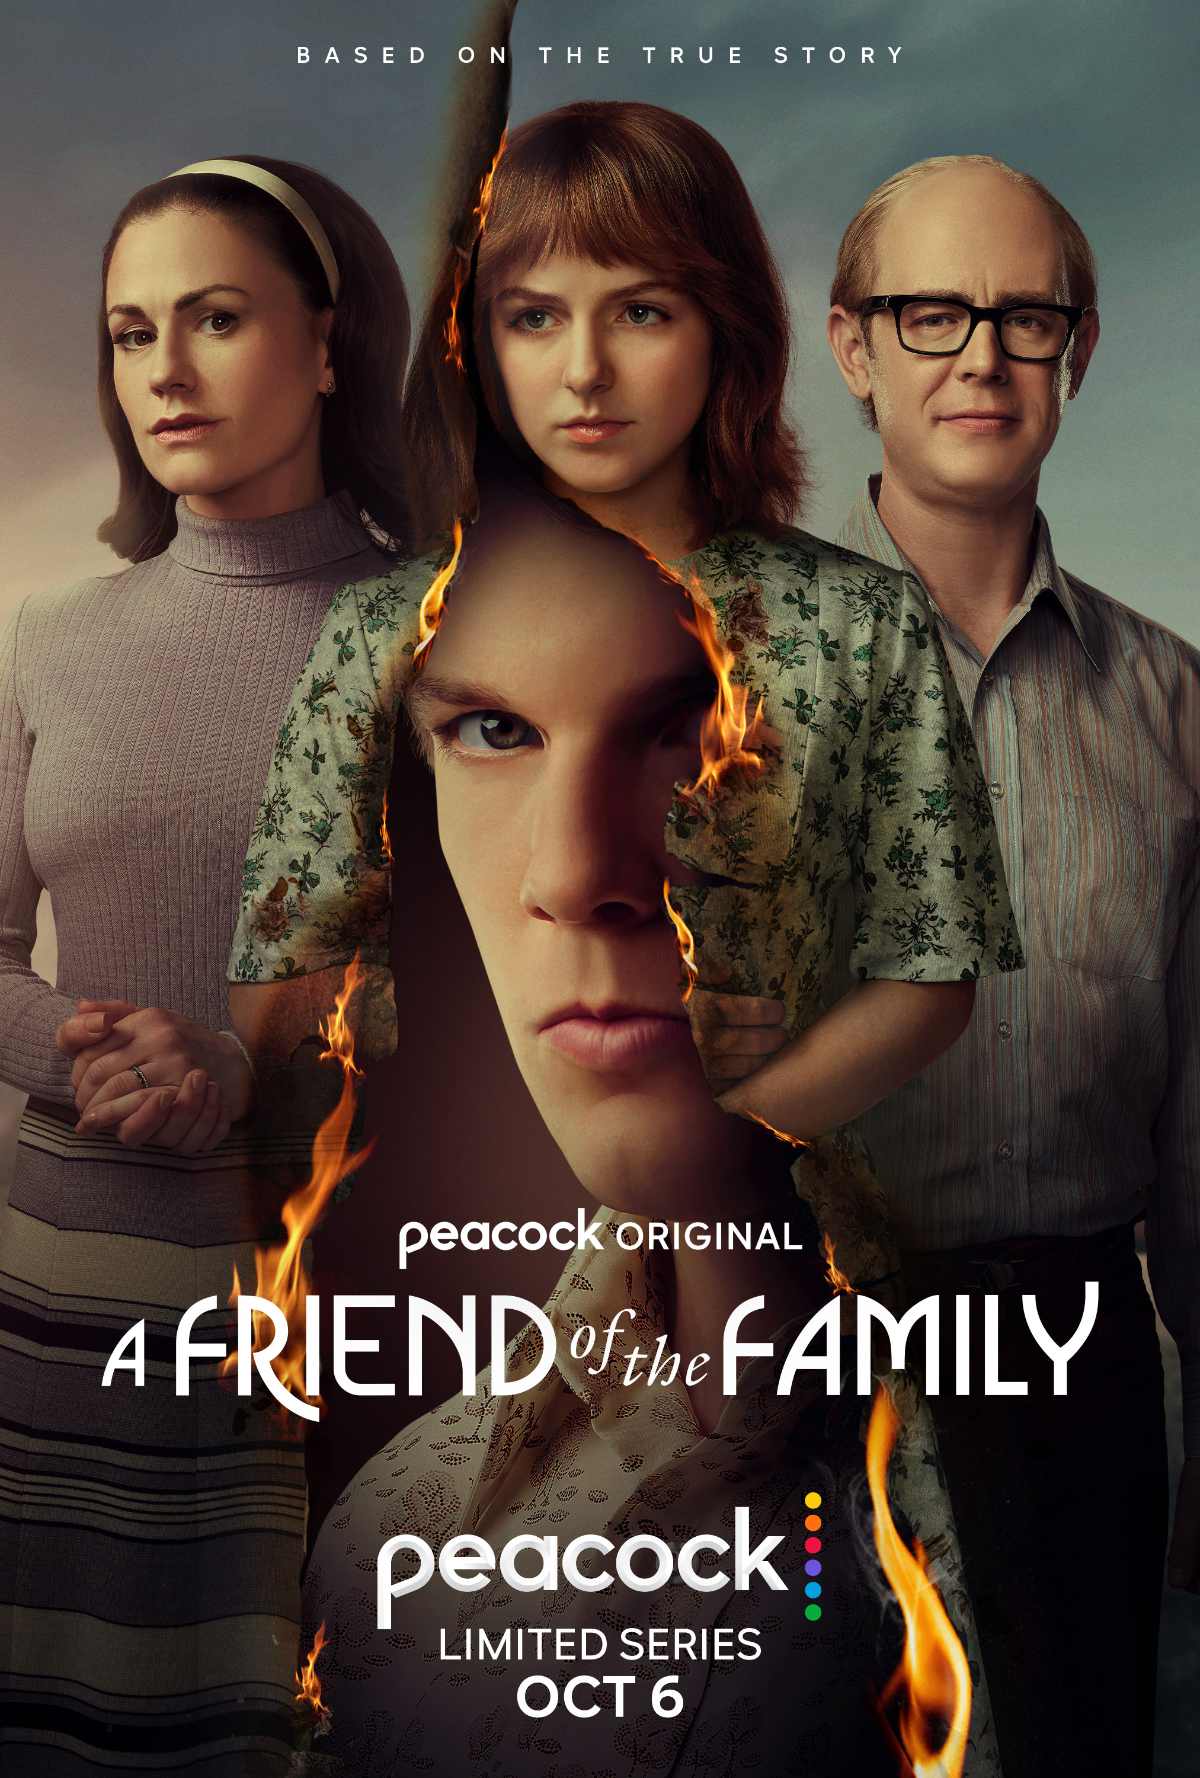 A Friend of the Family Season 1 Episode 2